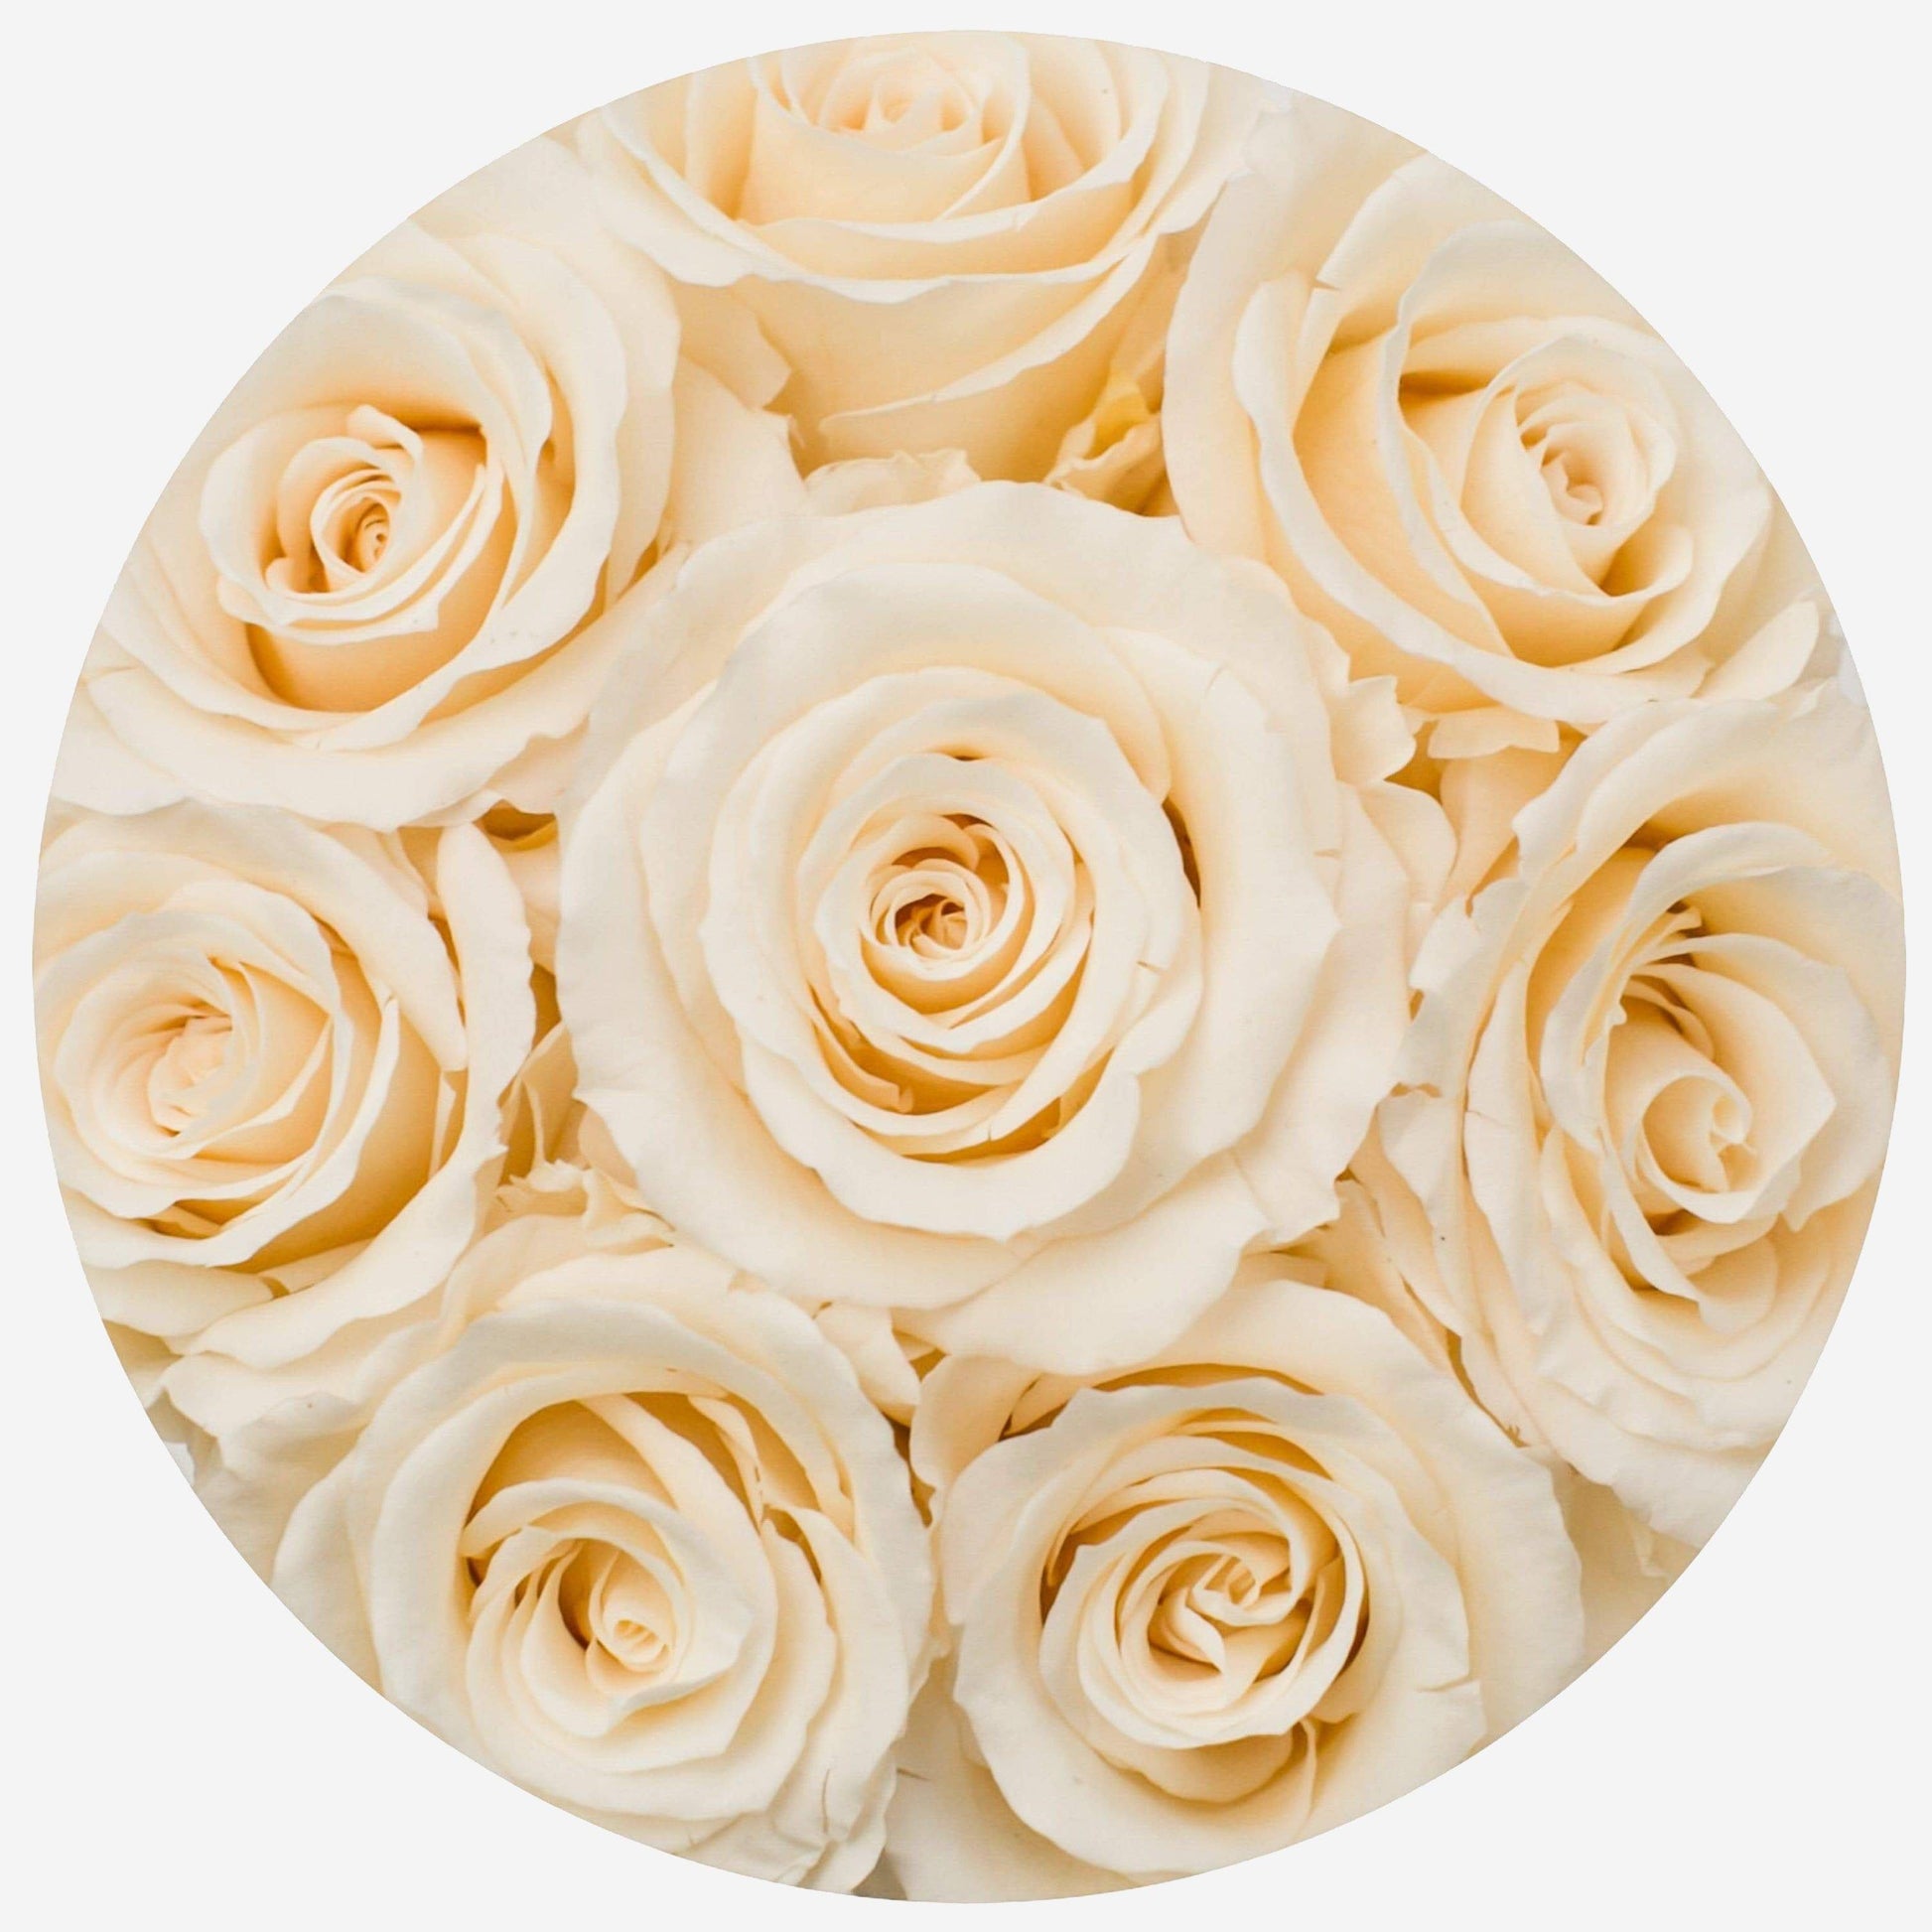 Enchanted Real Preserved Roses in a Heart Shaped Box, Fresh-Cut Eternity  Flowers that Last Years, Valentine's Day, Mother's Day Gifts for Her,  Luxury